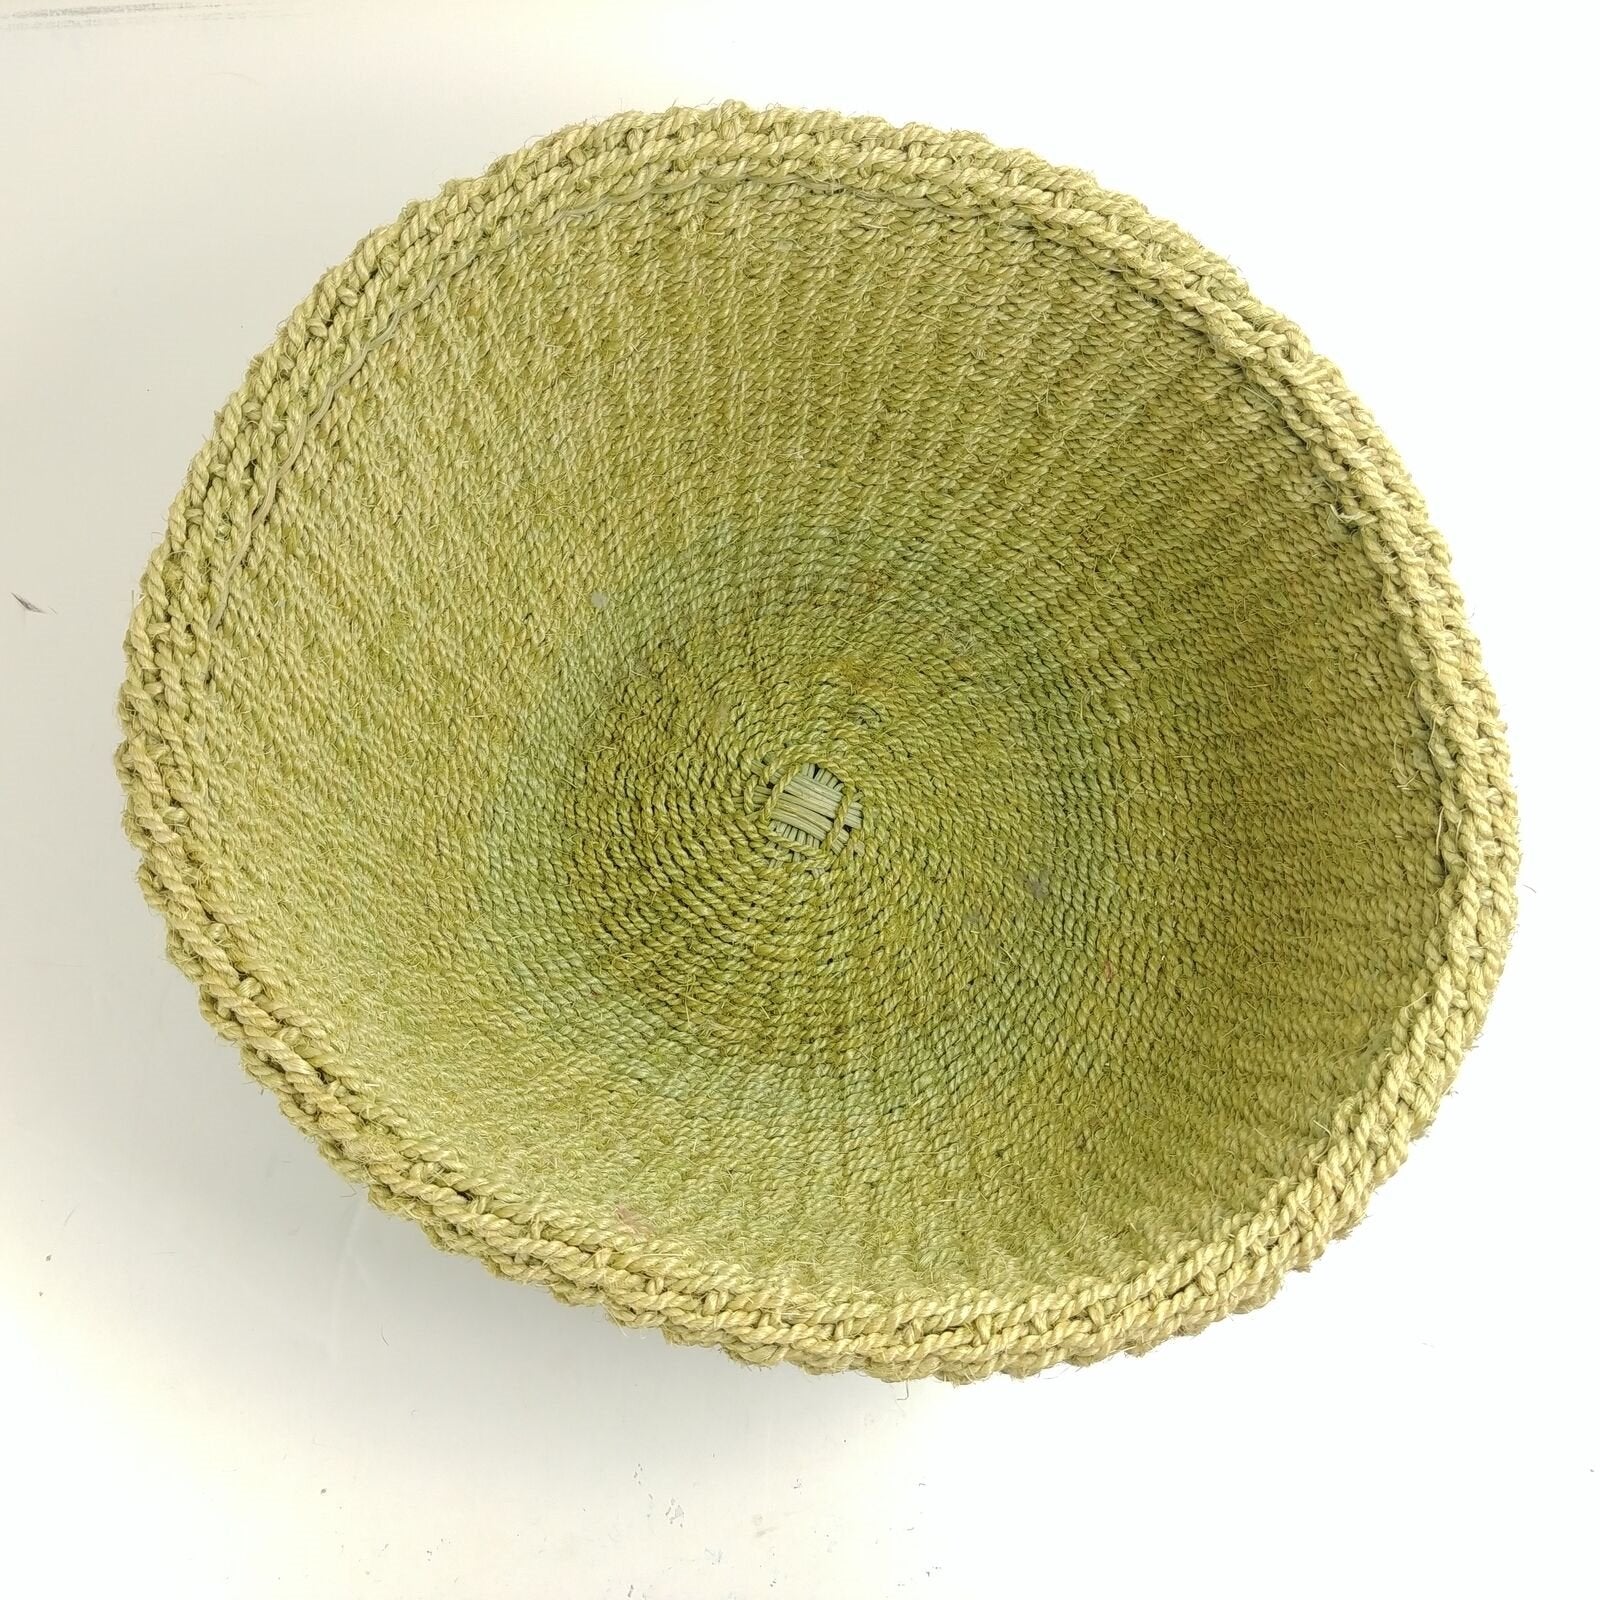 Basket Floppy Flexible Thin Rope and Reed Construction Rolled Edge